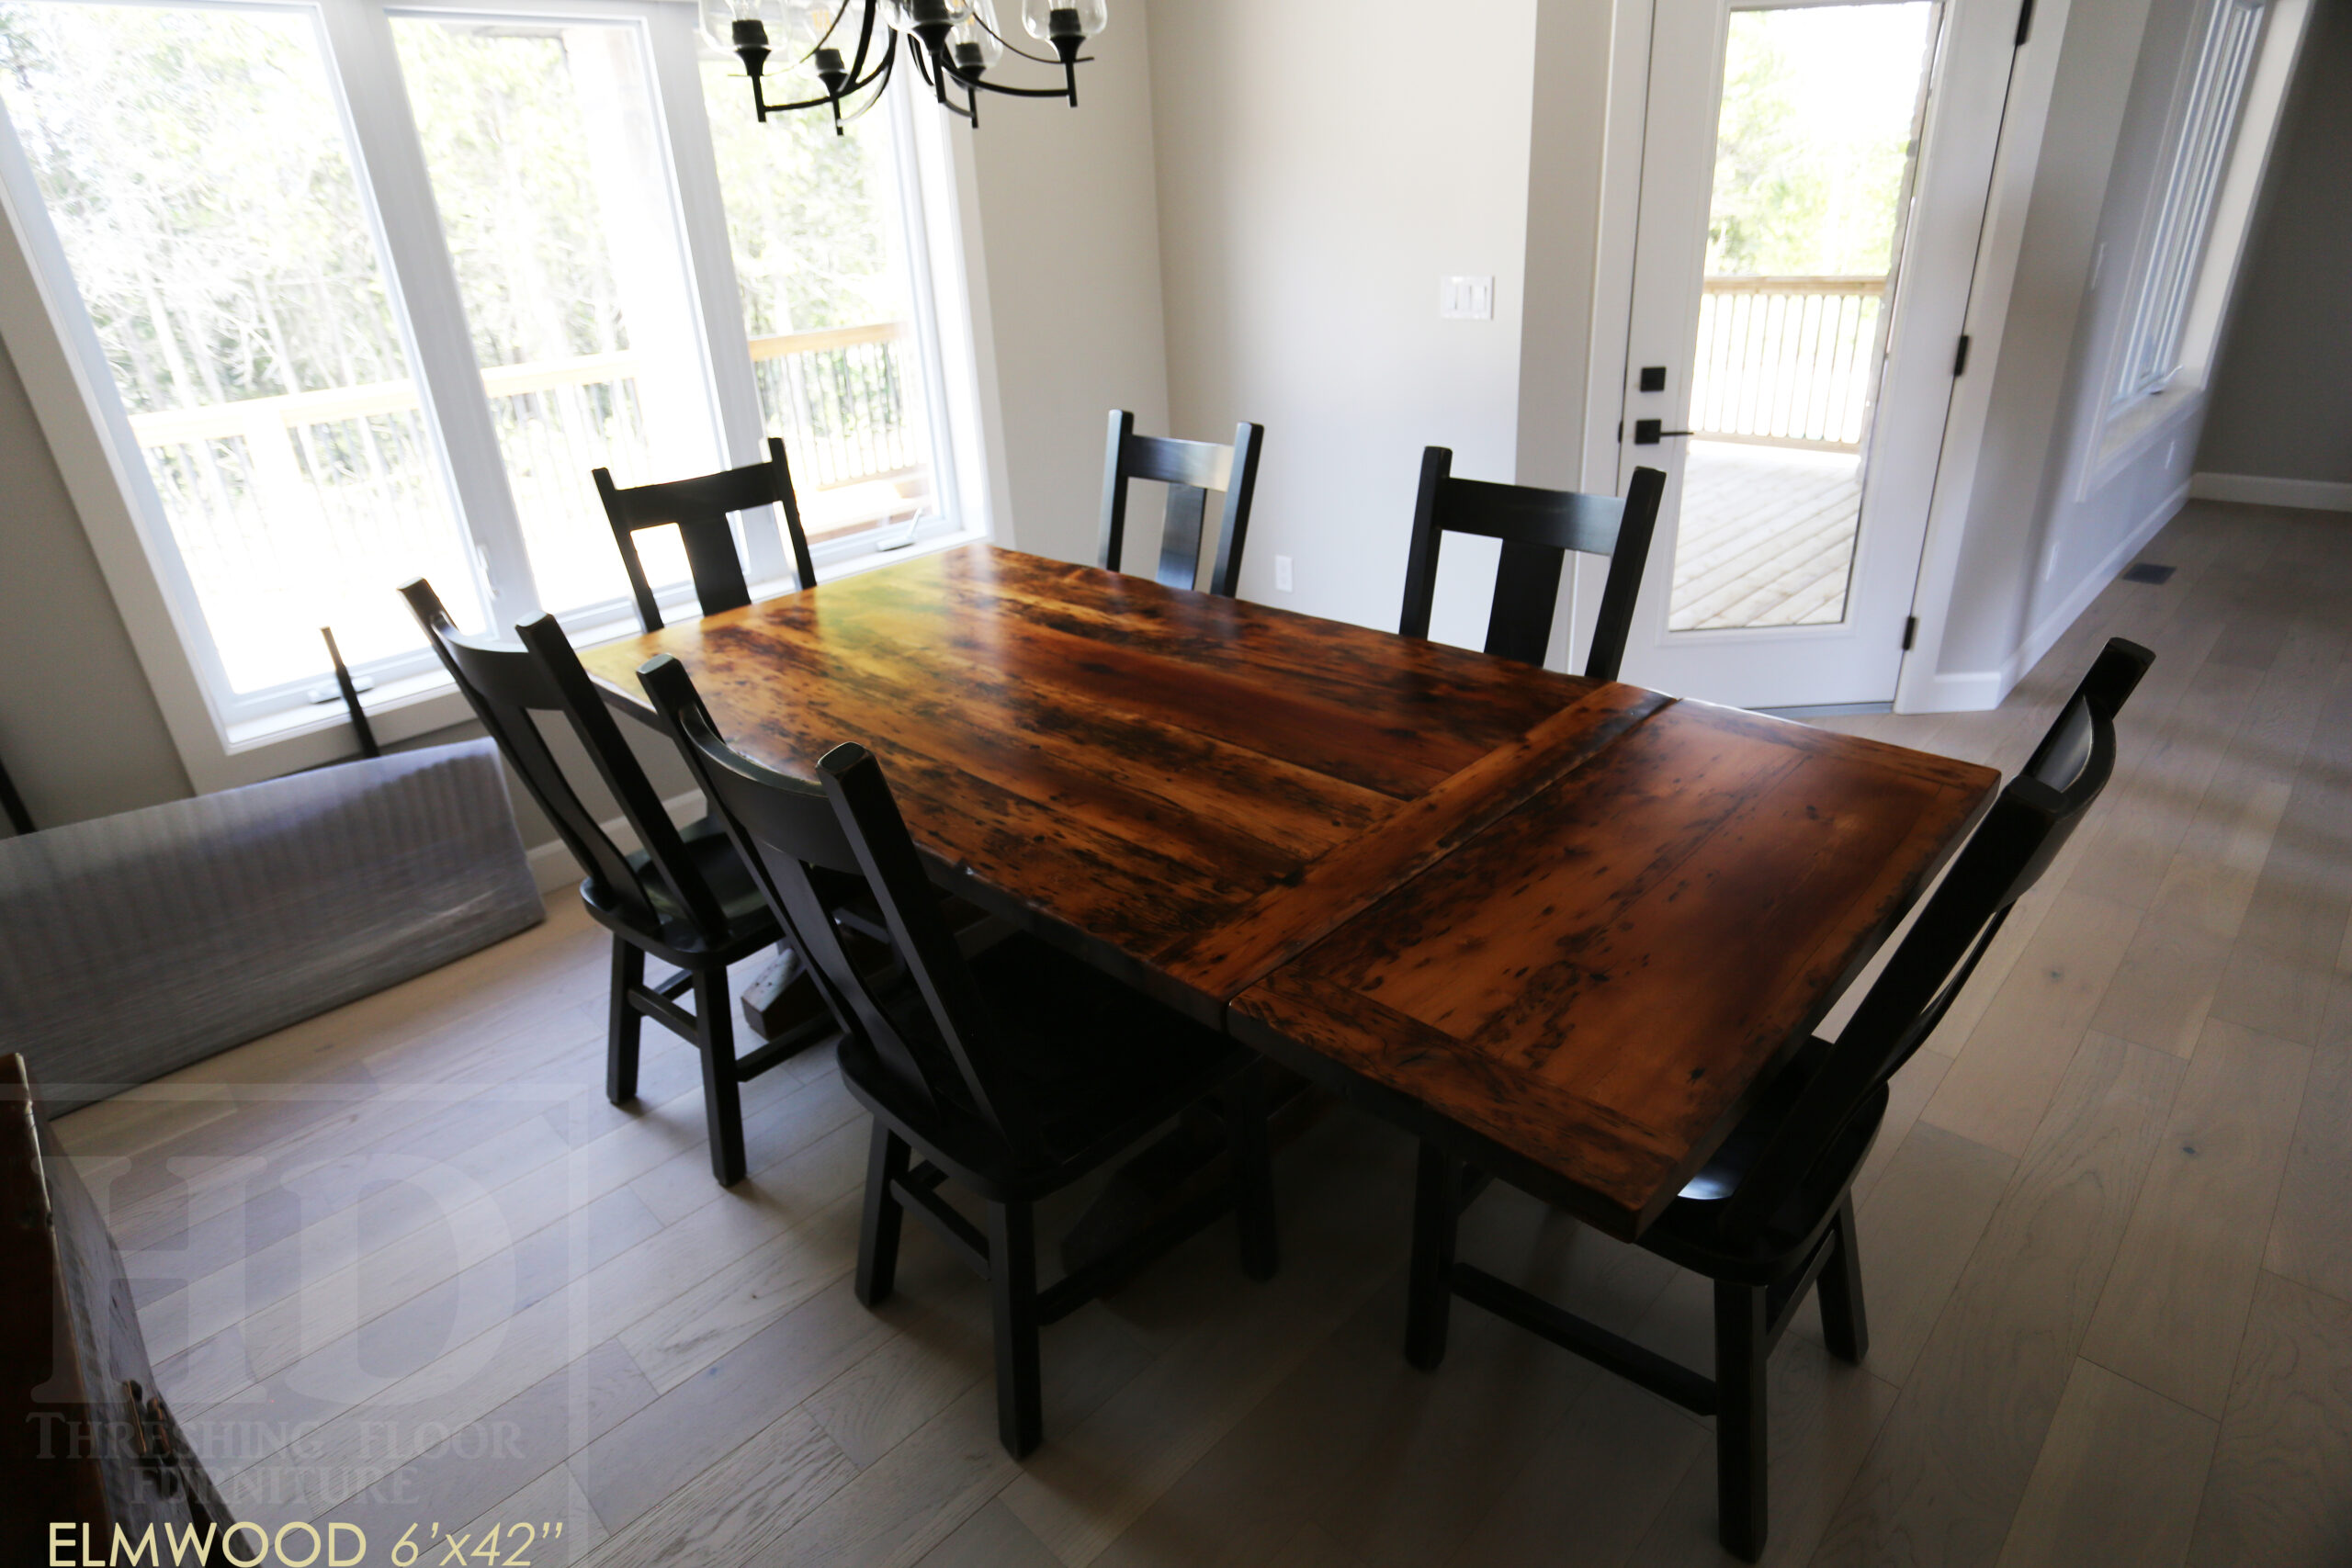 6’ Reclaimed Ontario Barnwood Table we made for an Elmwood, Ontario home – 42” wide – Trestle Base - Old Growth Hemlock Threshing Floor Construction - Original edges & distressing maintained – Bread Edge Board Ends – Premium epoxy + satin polyurethane finish – Two 18” Leaf Extensions – 6 Plank Back Chairs / Wormy Maple / Black with Sandthroughs / Polyurethane Clearcoat Finish - www.table.ca